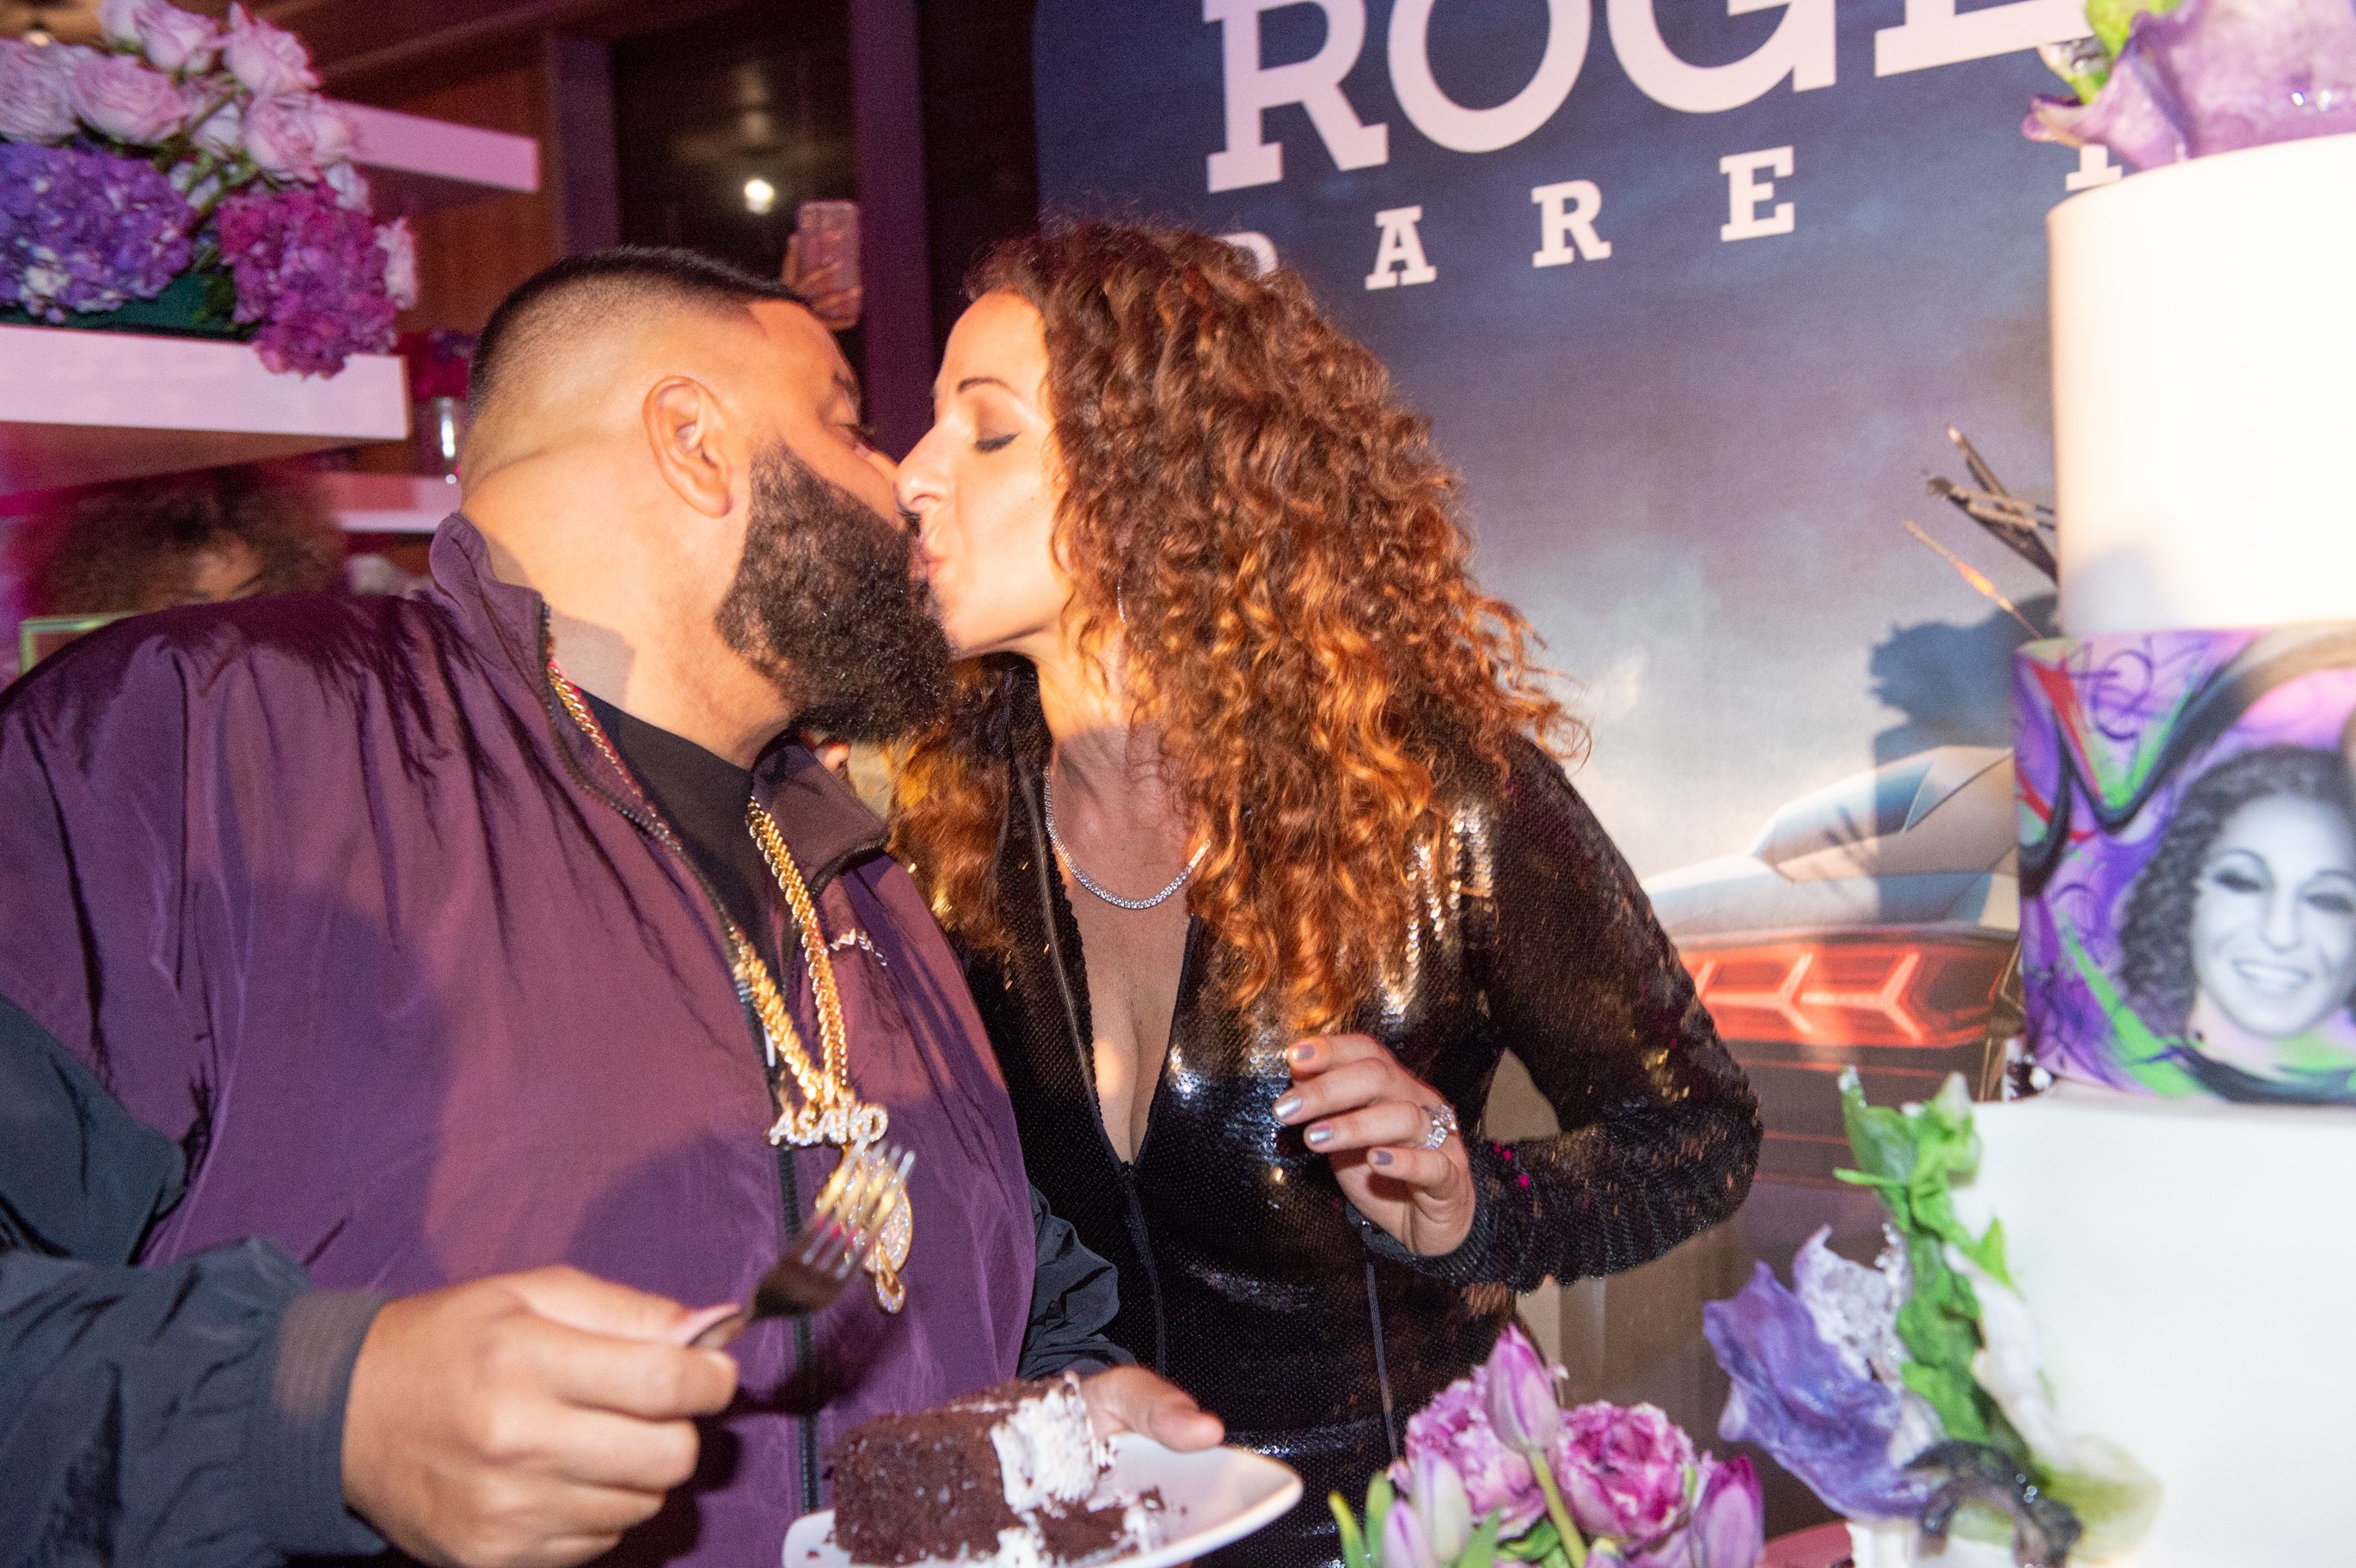     Nicole Tuck and DJ Khaled attend Nicole and DJ Khaled's Birthday Celebration with Haute Living and Roger Dubuis at Perez Art Museum Miami on December 9, 2018 in Miami, Florida.  |  Source: Getty Images